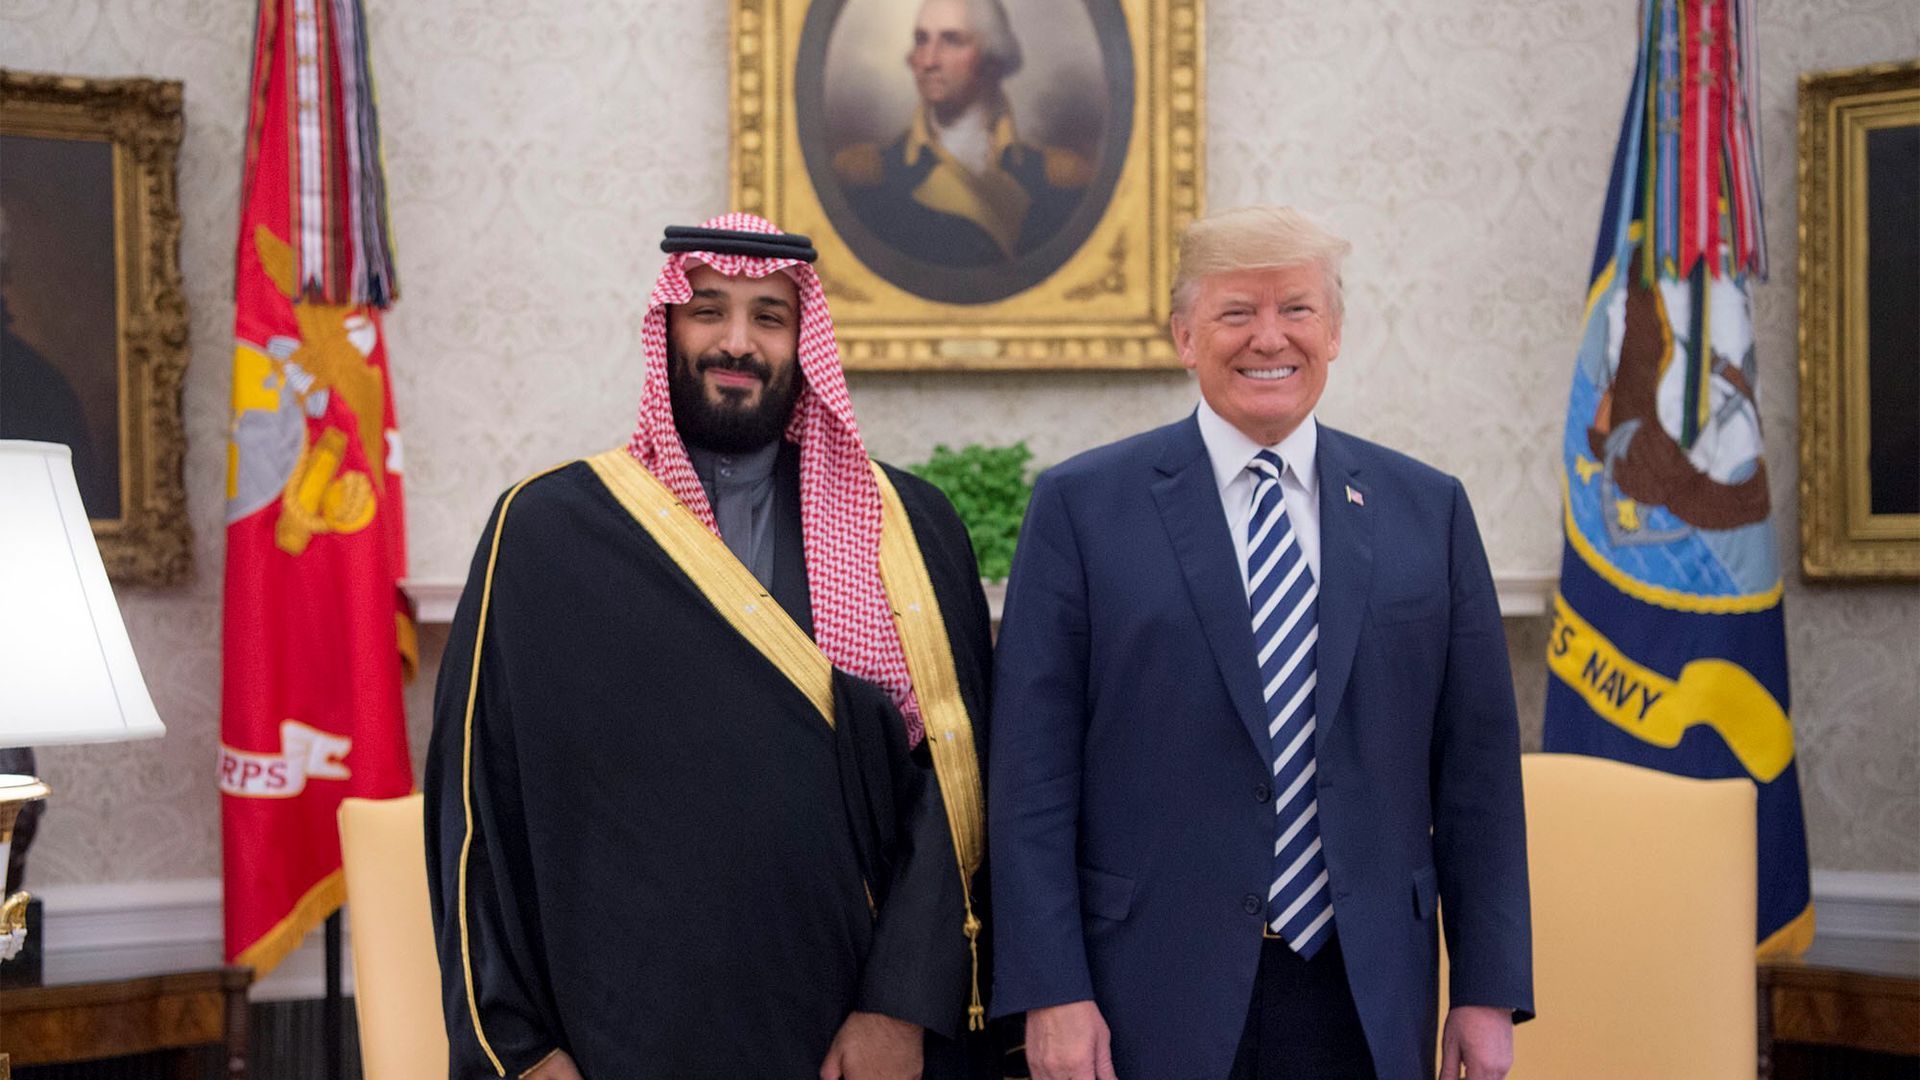 Photo of Crown Prince MBS and President Trump standing together